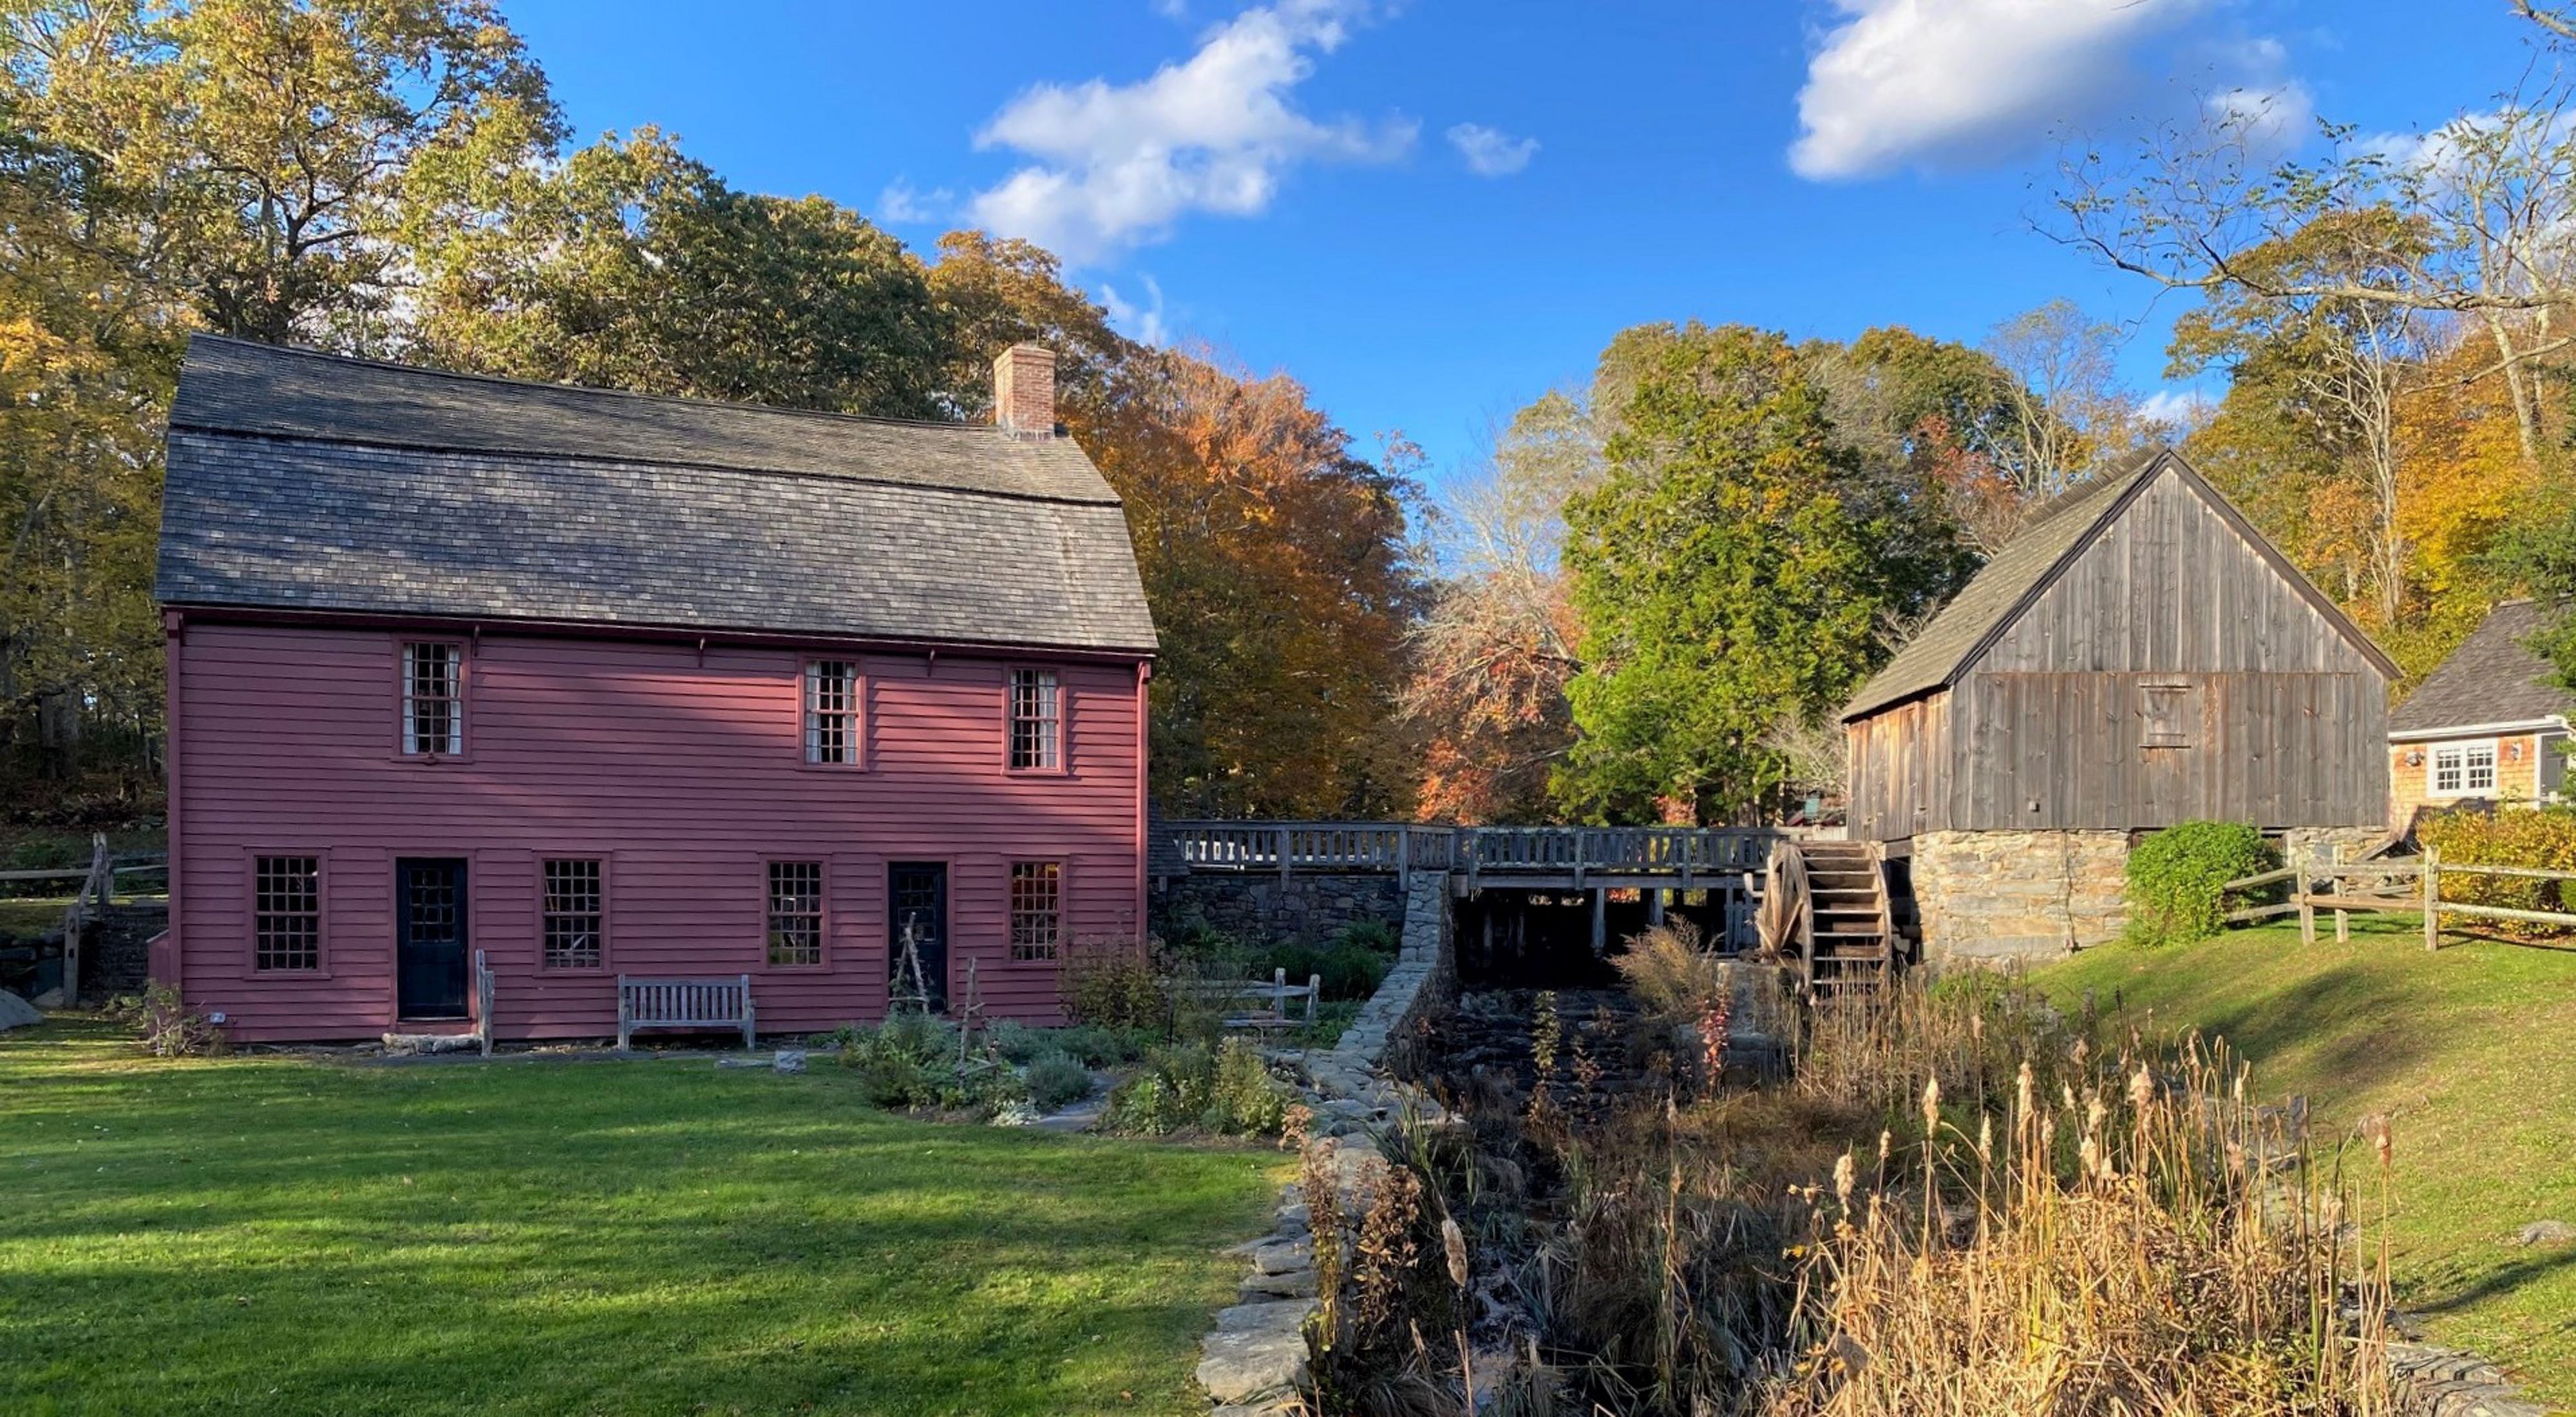 An 18th century home, painted deep red, sits beside a stone mill race and small, wooden grist mill. 